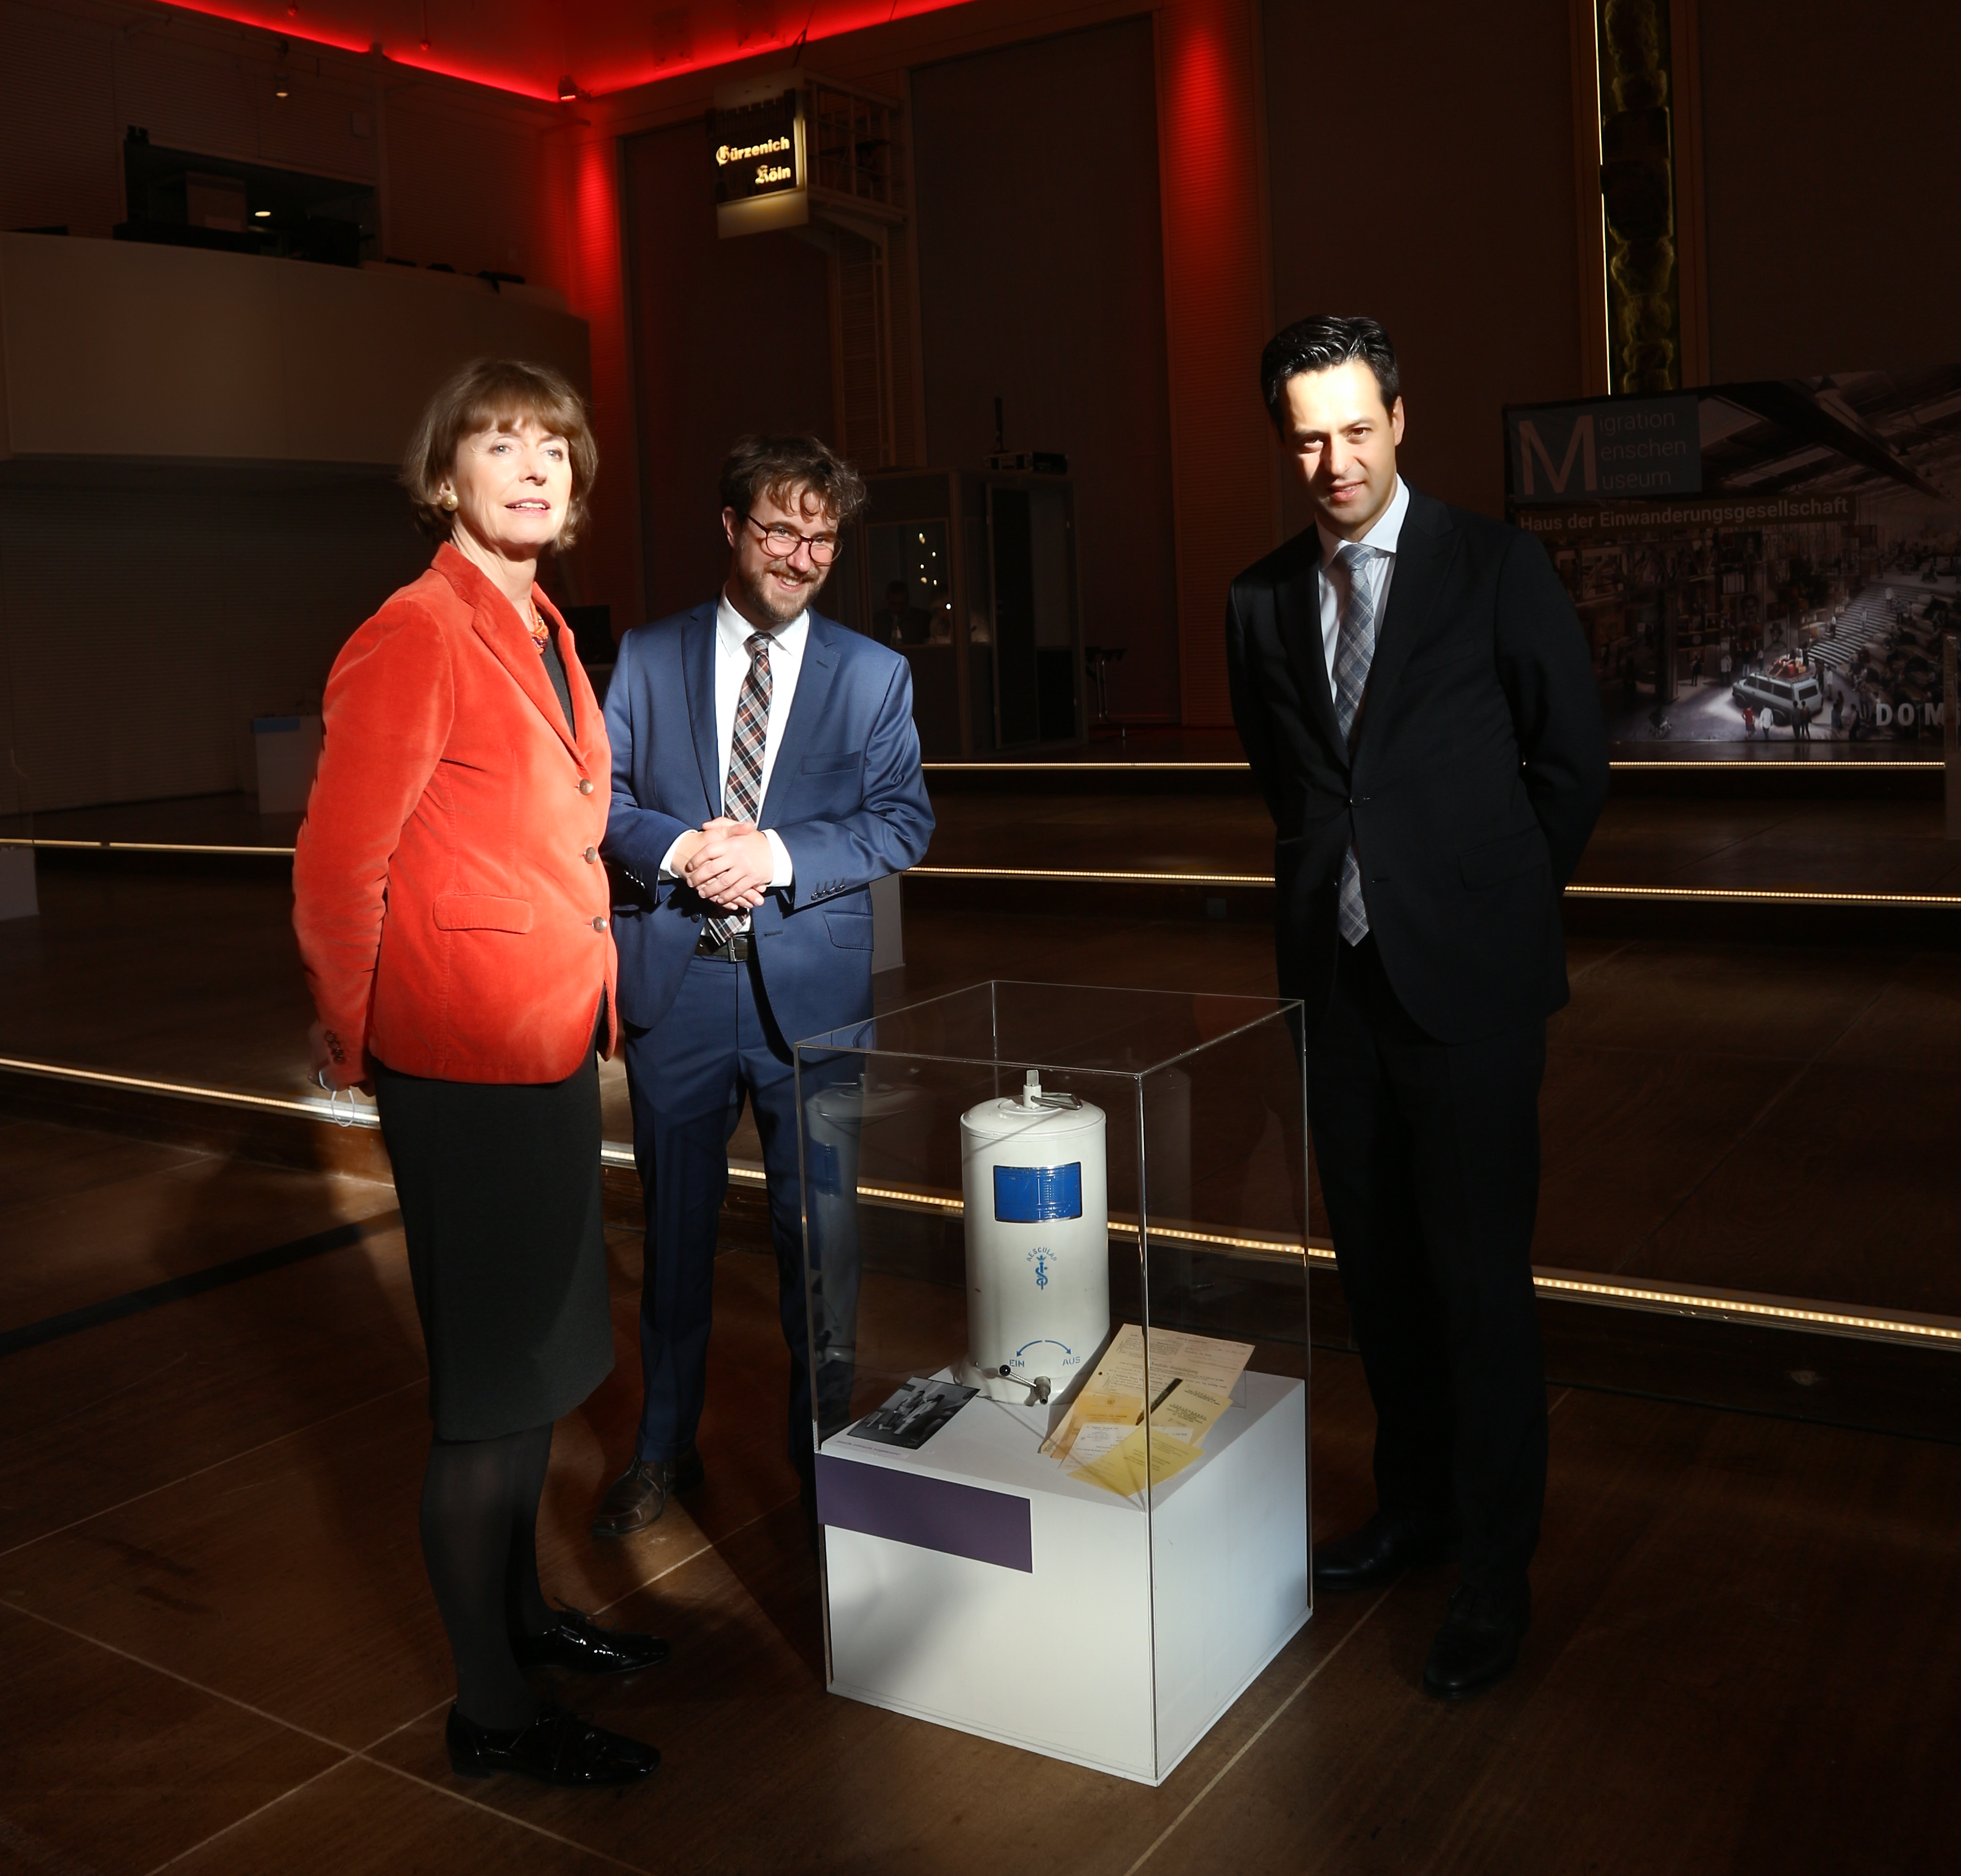 Lord Mayor Henriette Reker, Turkish Consul General Turhan Kaya and DOMiD Managing Director Dr Robert Fuchs gathered at our exhibition during the ceremony in Cologne's Gürzenich. Photo: DOMiD Archive, Cologne